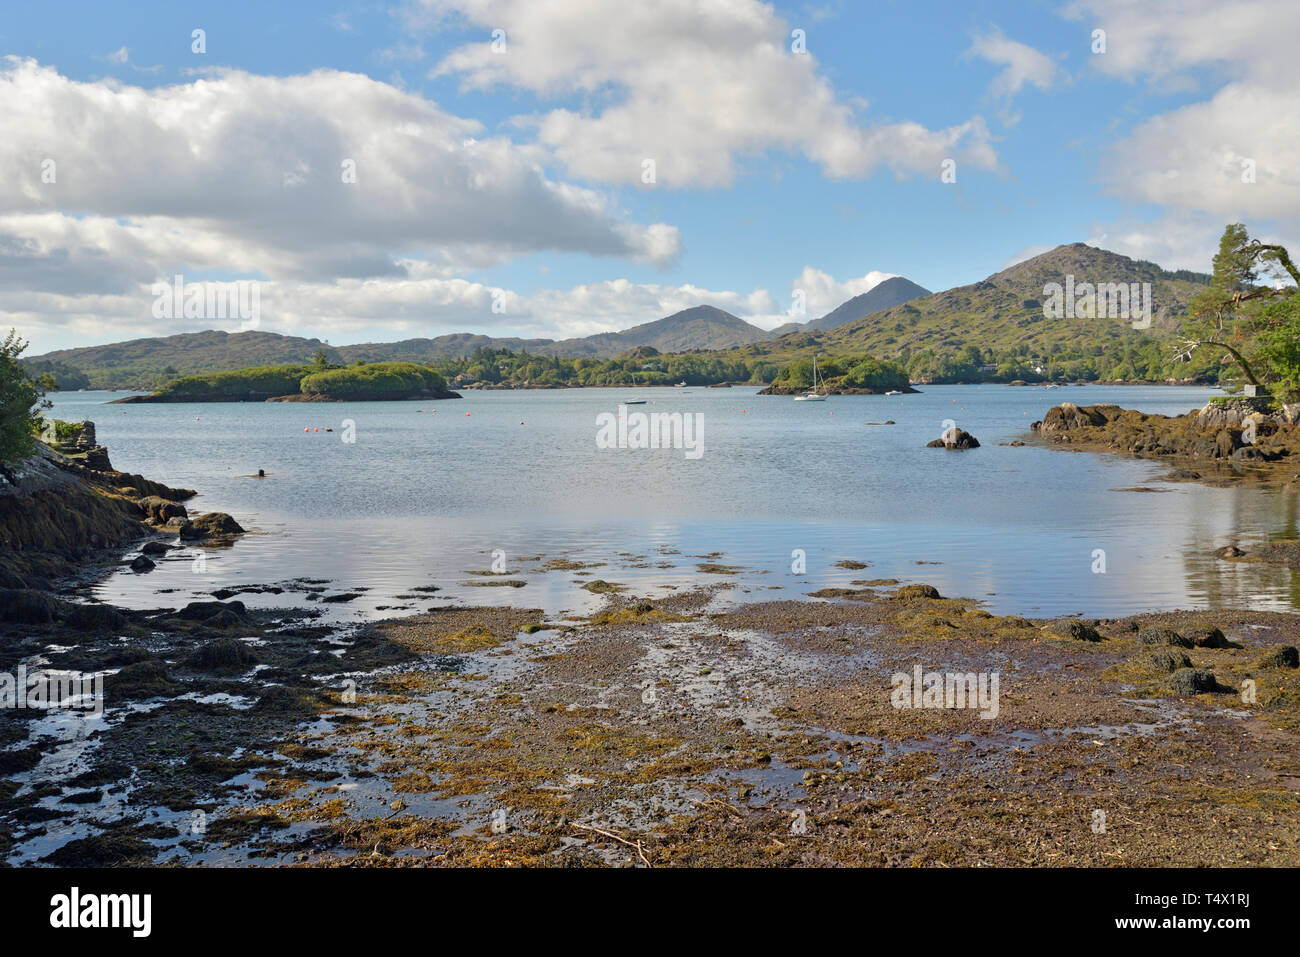 View of Gowlbeg and Sugarloaf with Friar's and Bark Islands and Shrone Hill in the Foreground on the Shore of the Bamboo Park Glengarrif Stock Photo